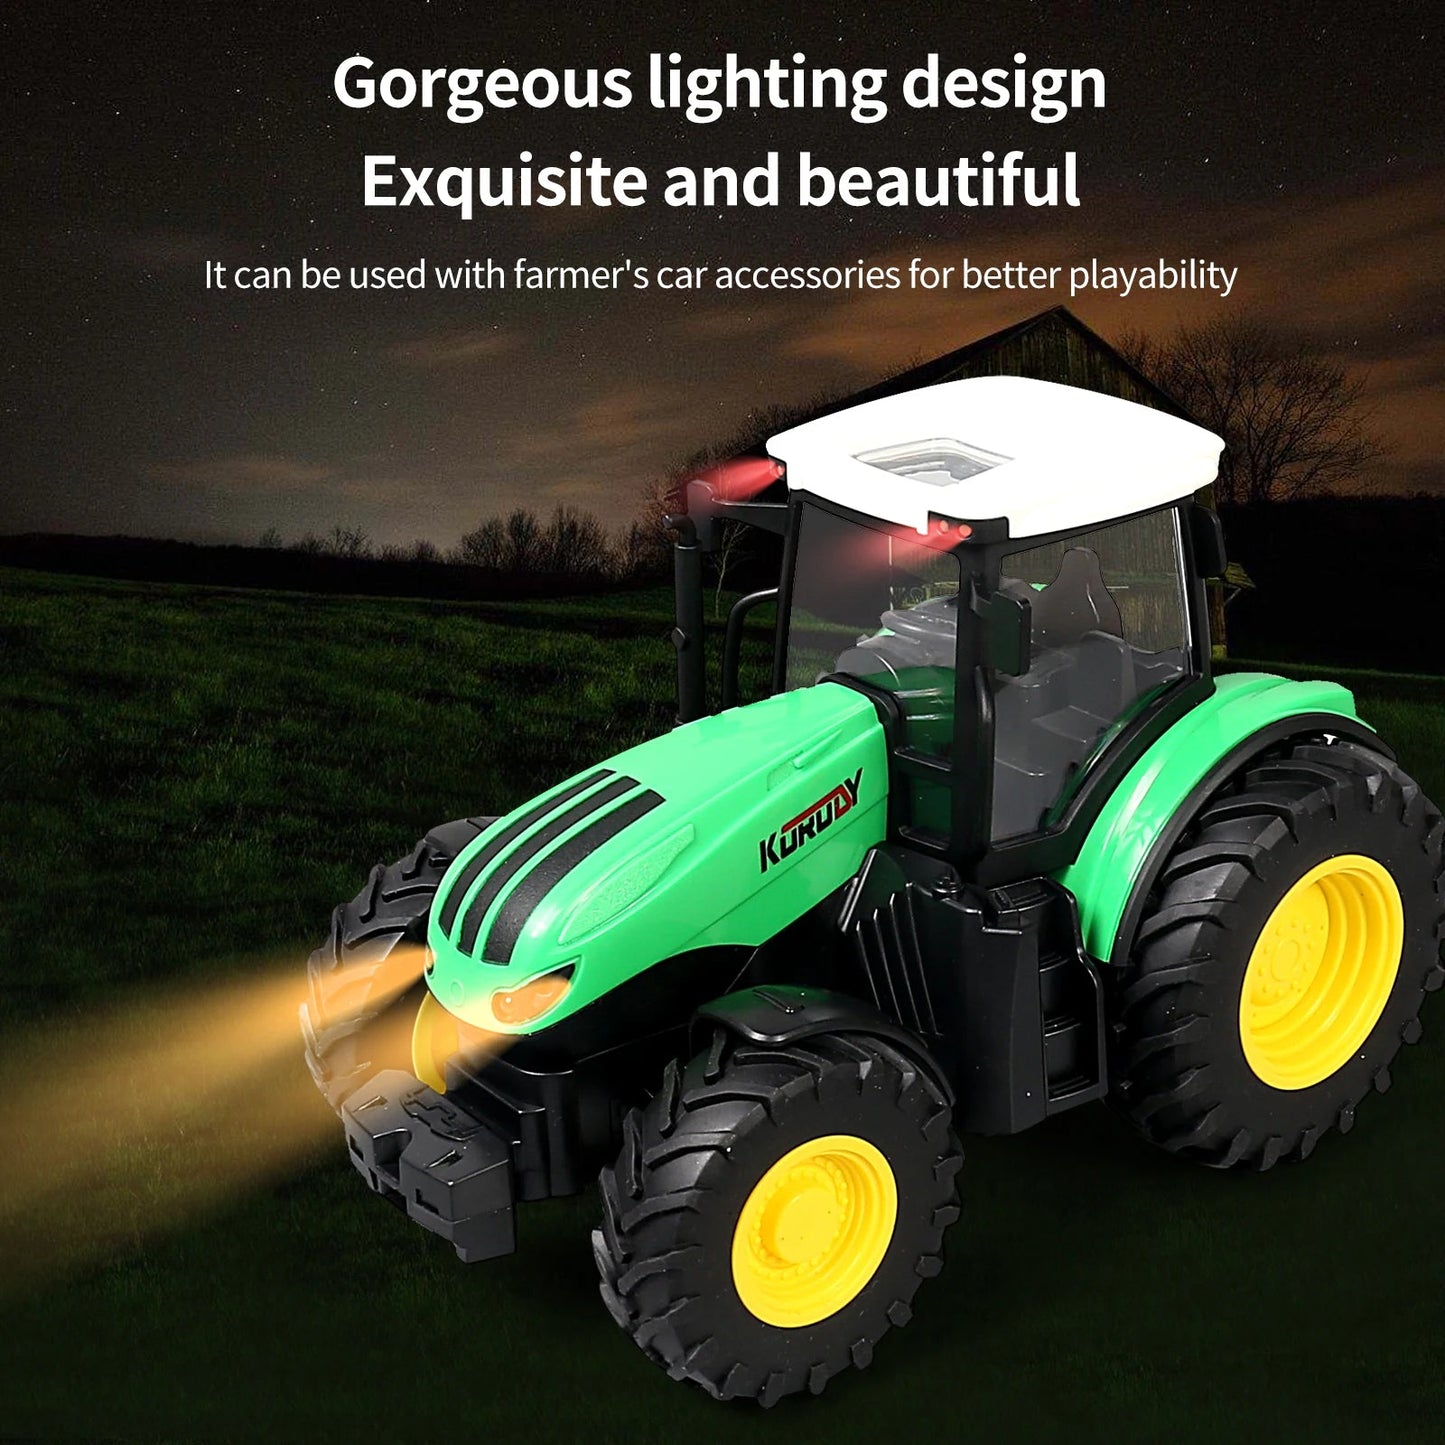 Simulation Agricultural Vehicle 1:16 RC Farm Tractors Car With LED - ToylandEU